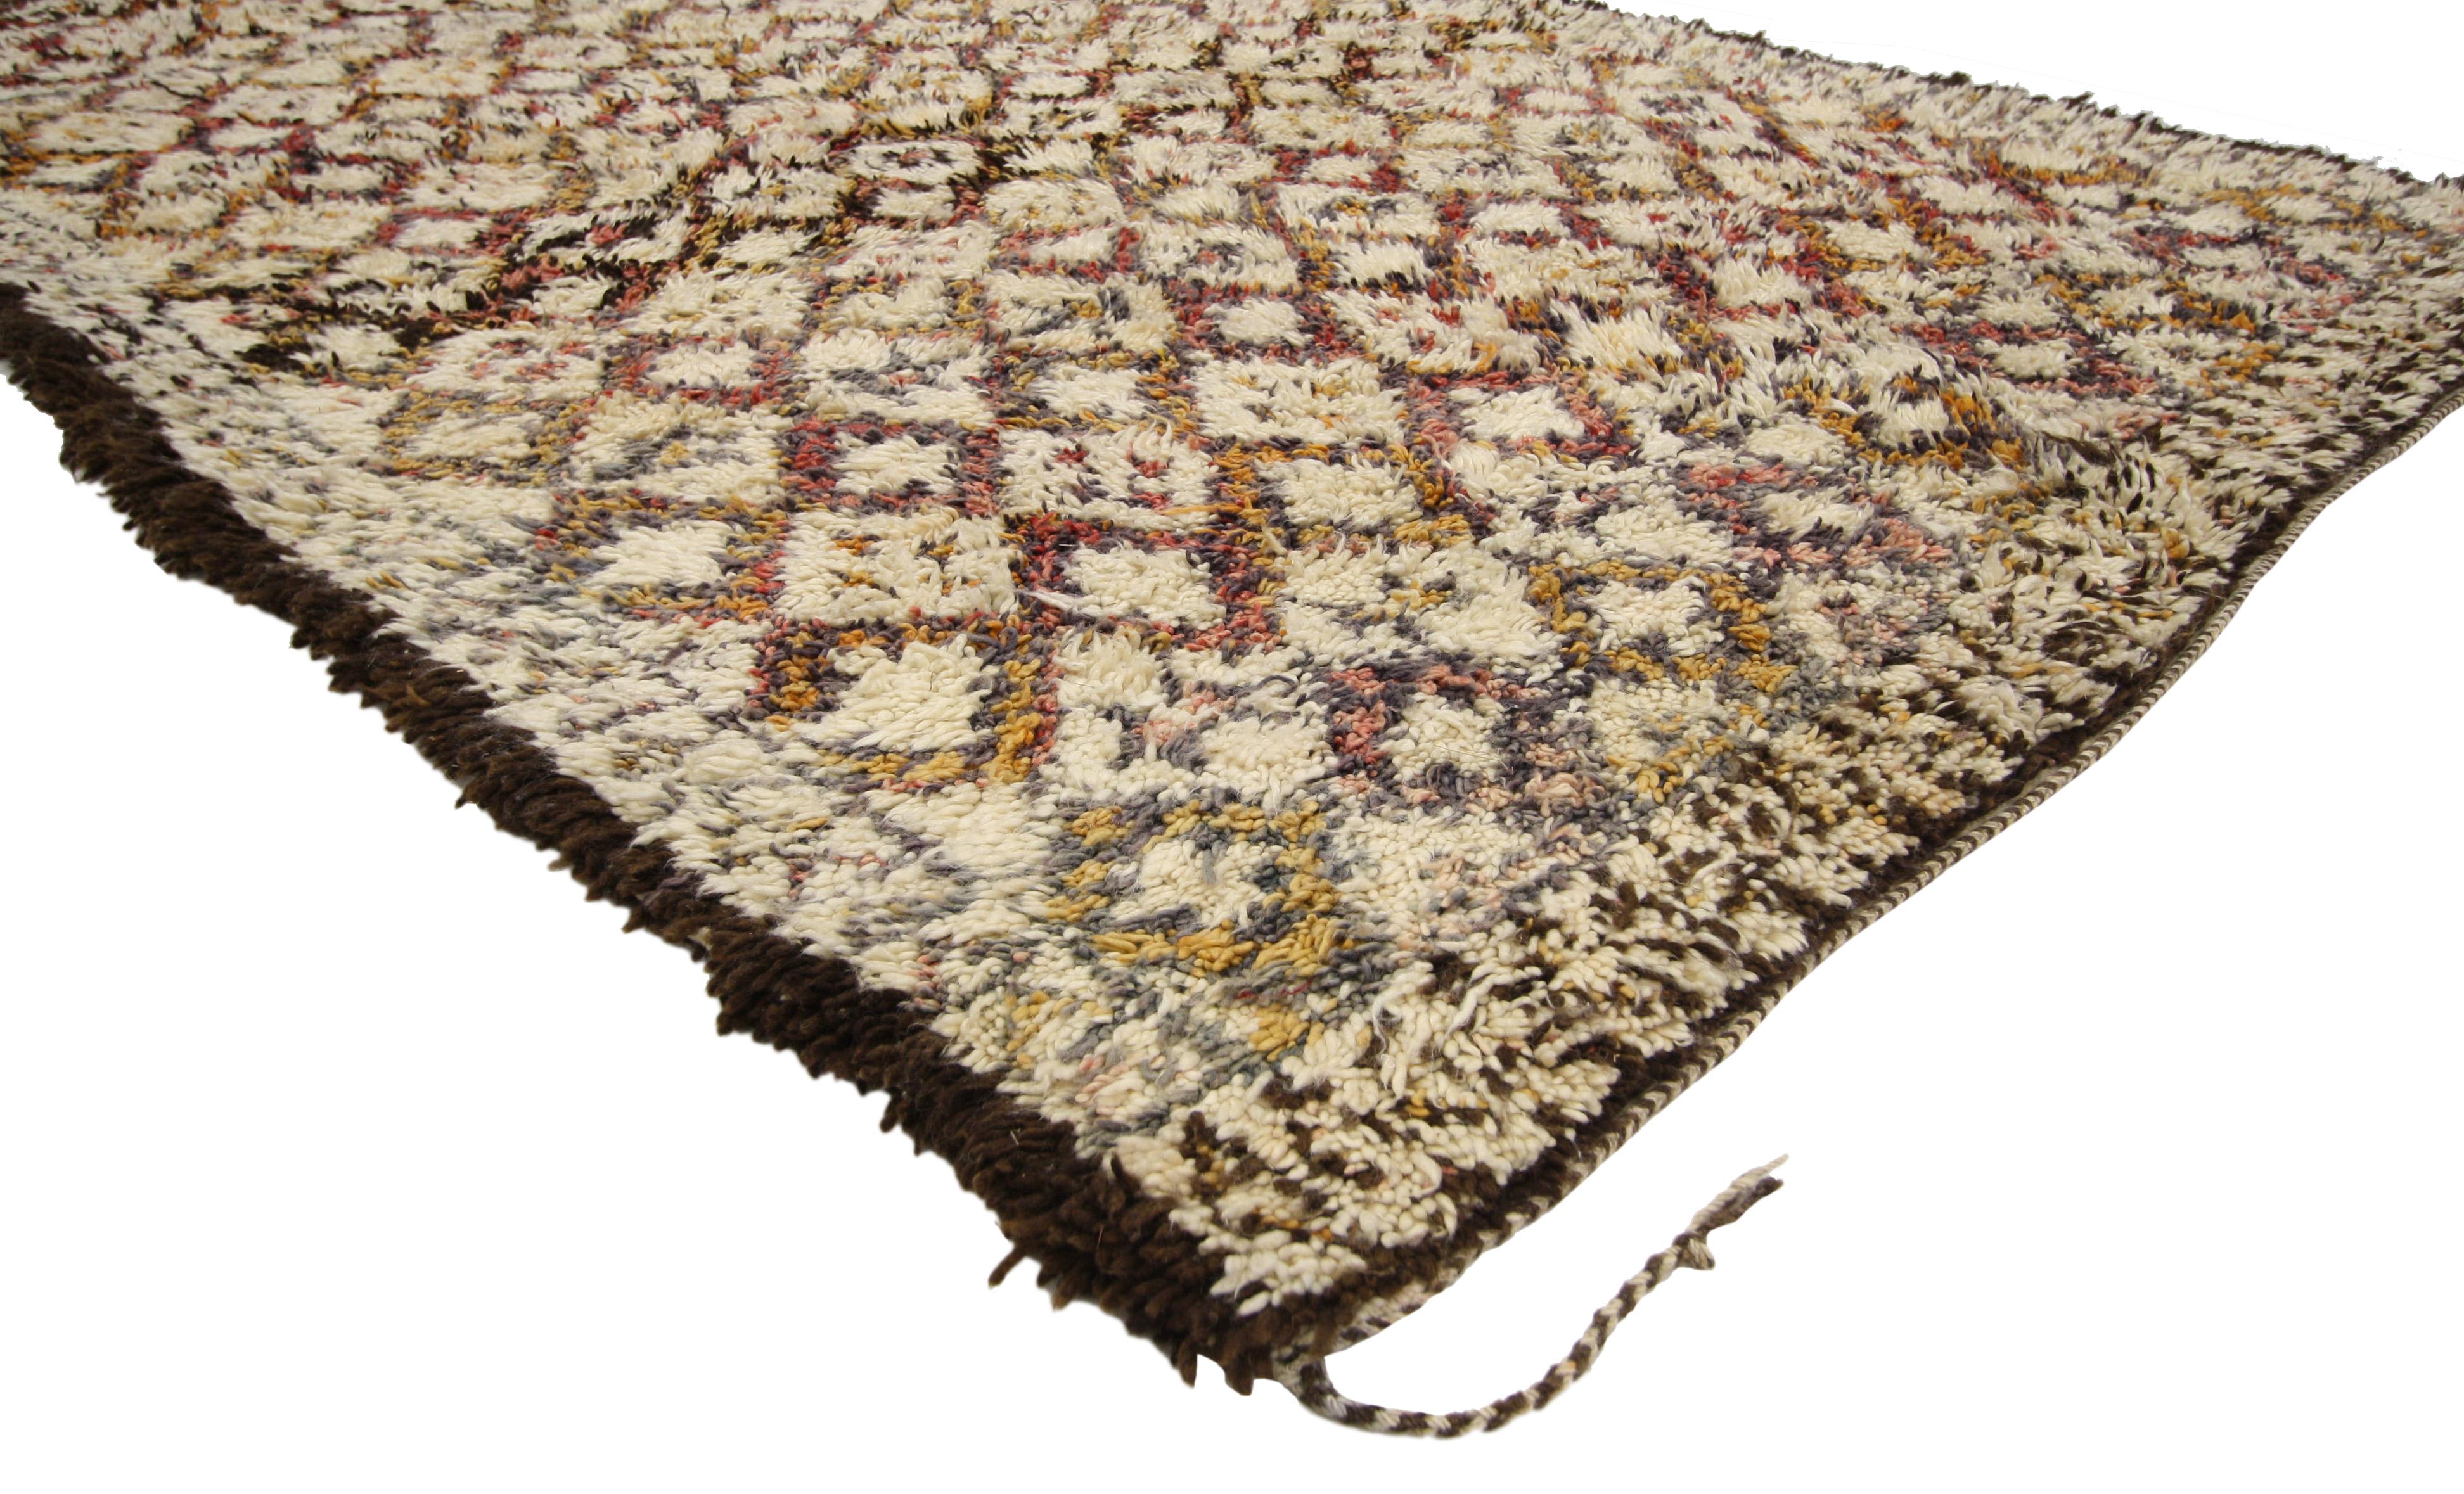 20690 Vintage Moroccan Beni Ourain Rug, 06'04 x 10'03.
Warm worldy charm meets midcentury modern style in this hand-knotted wool vintage Moroccan Beni Ourain rug. The visual complexity and earthy colorway woven into piece work together creating a